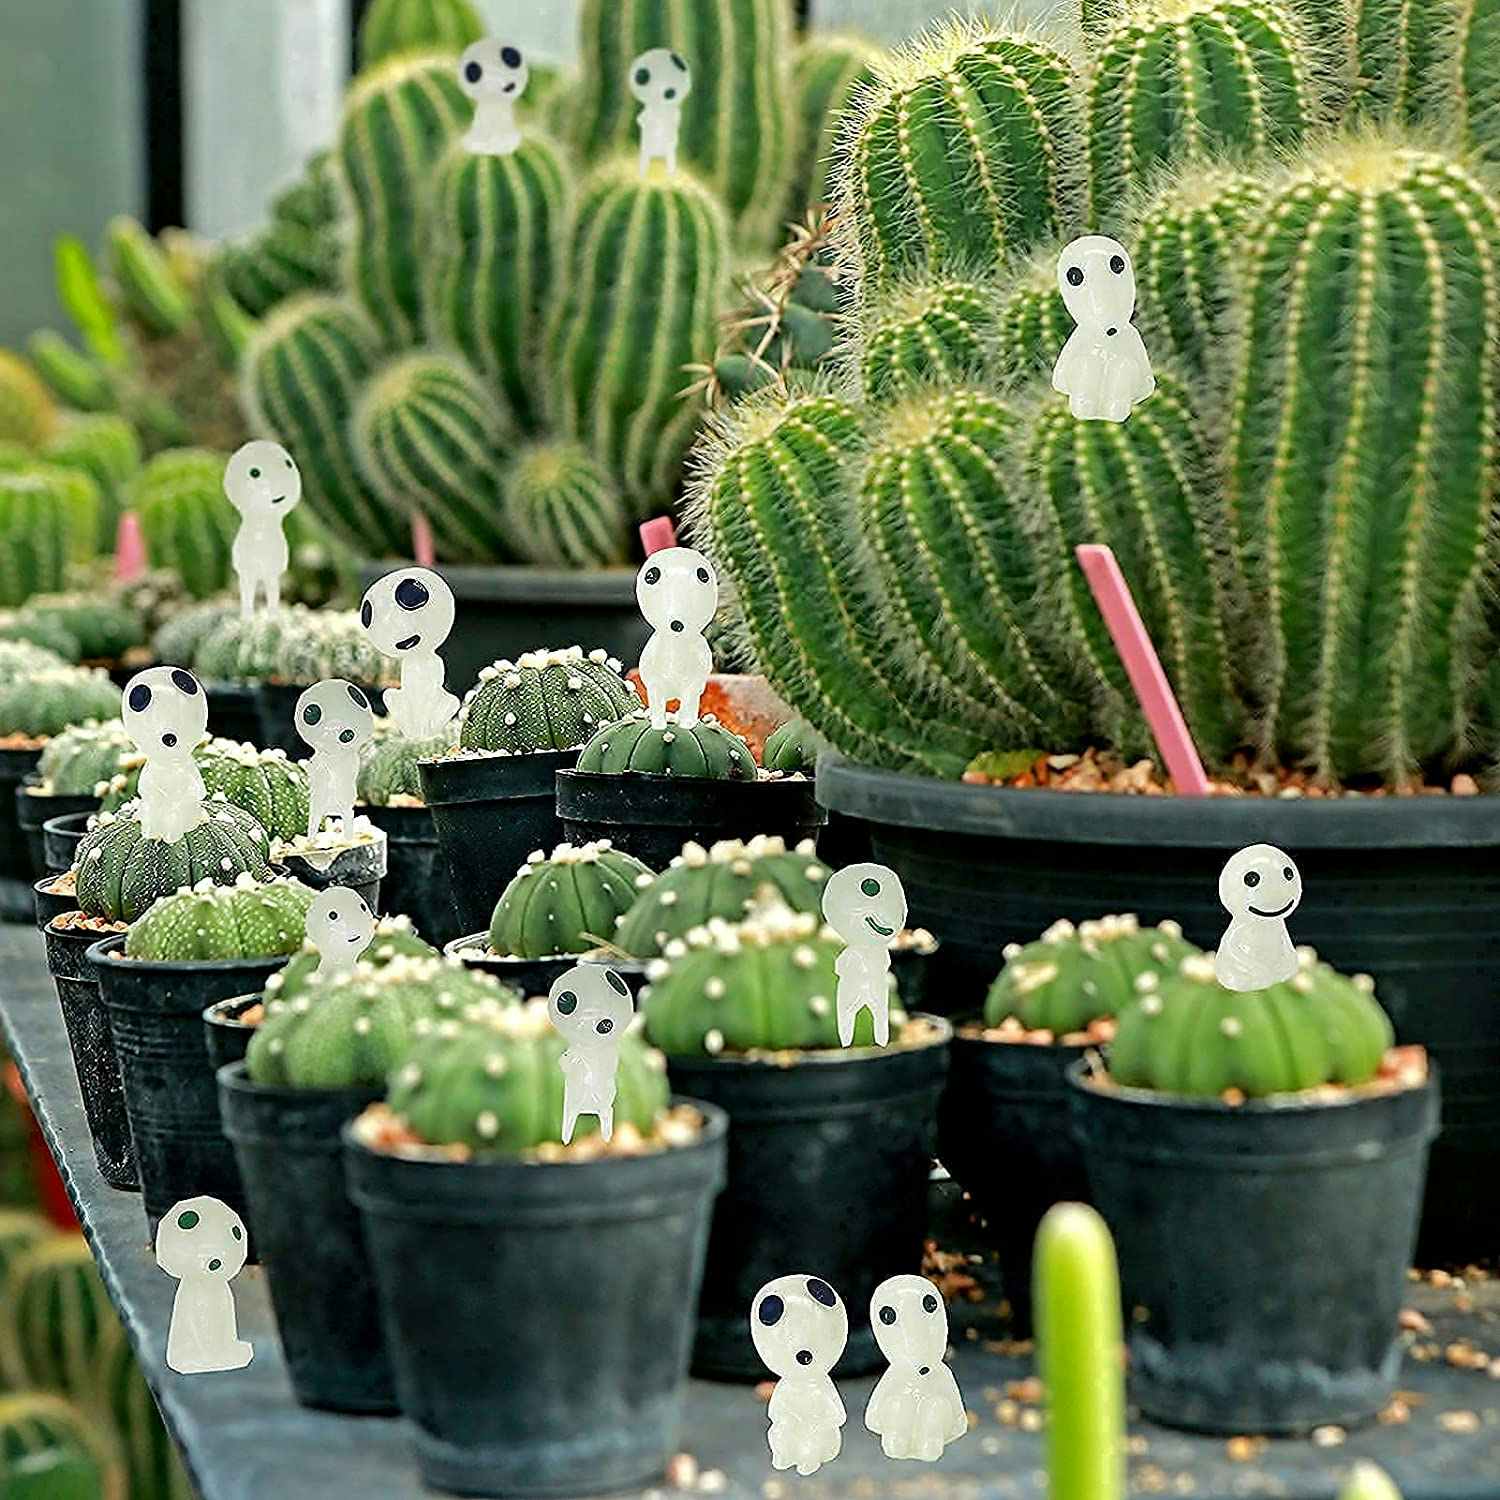 A set of tiny ghost tree elves placed on cacti outside.